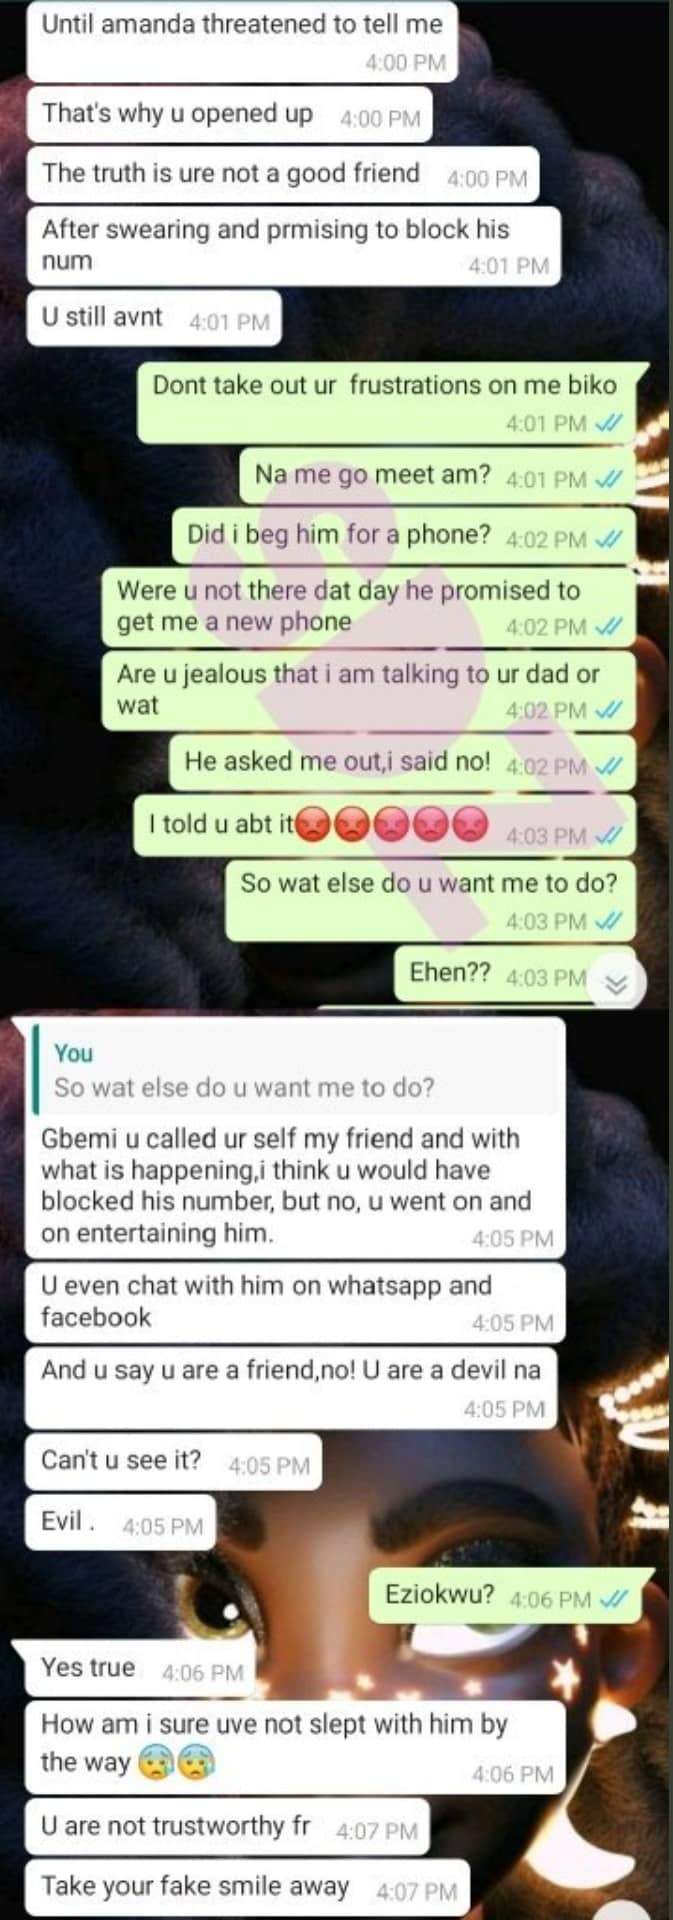 Girl slams her friend for accepting phone gift from her dad without her consent